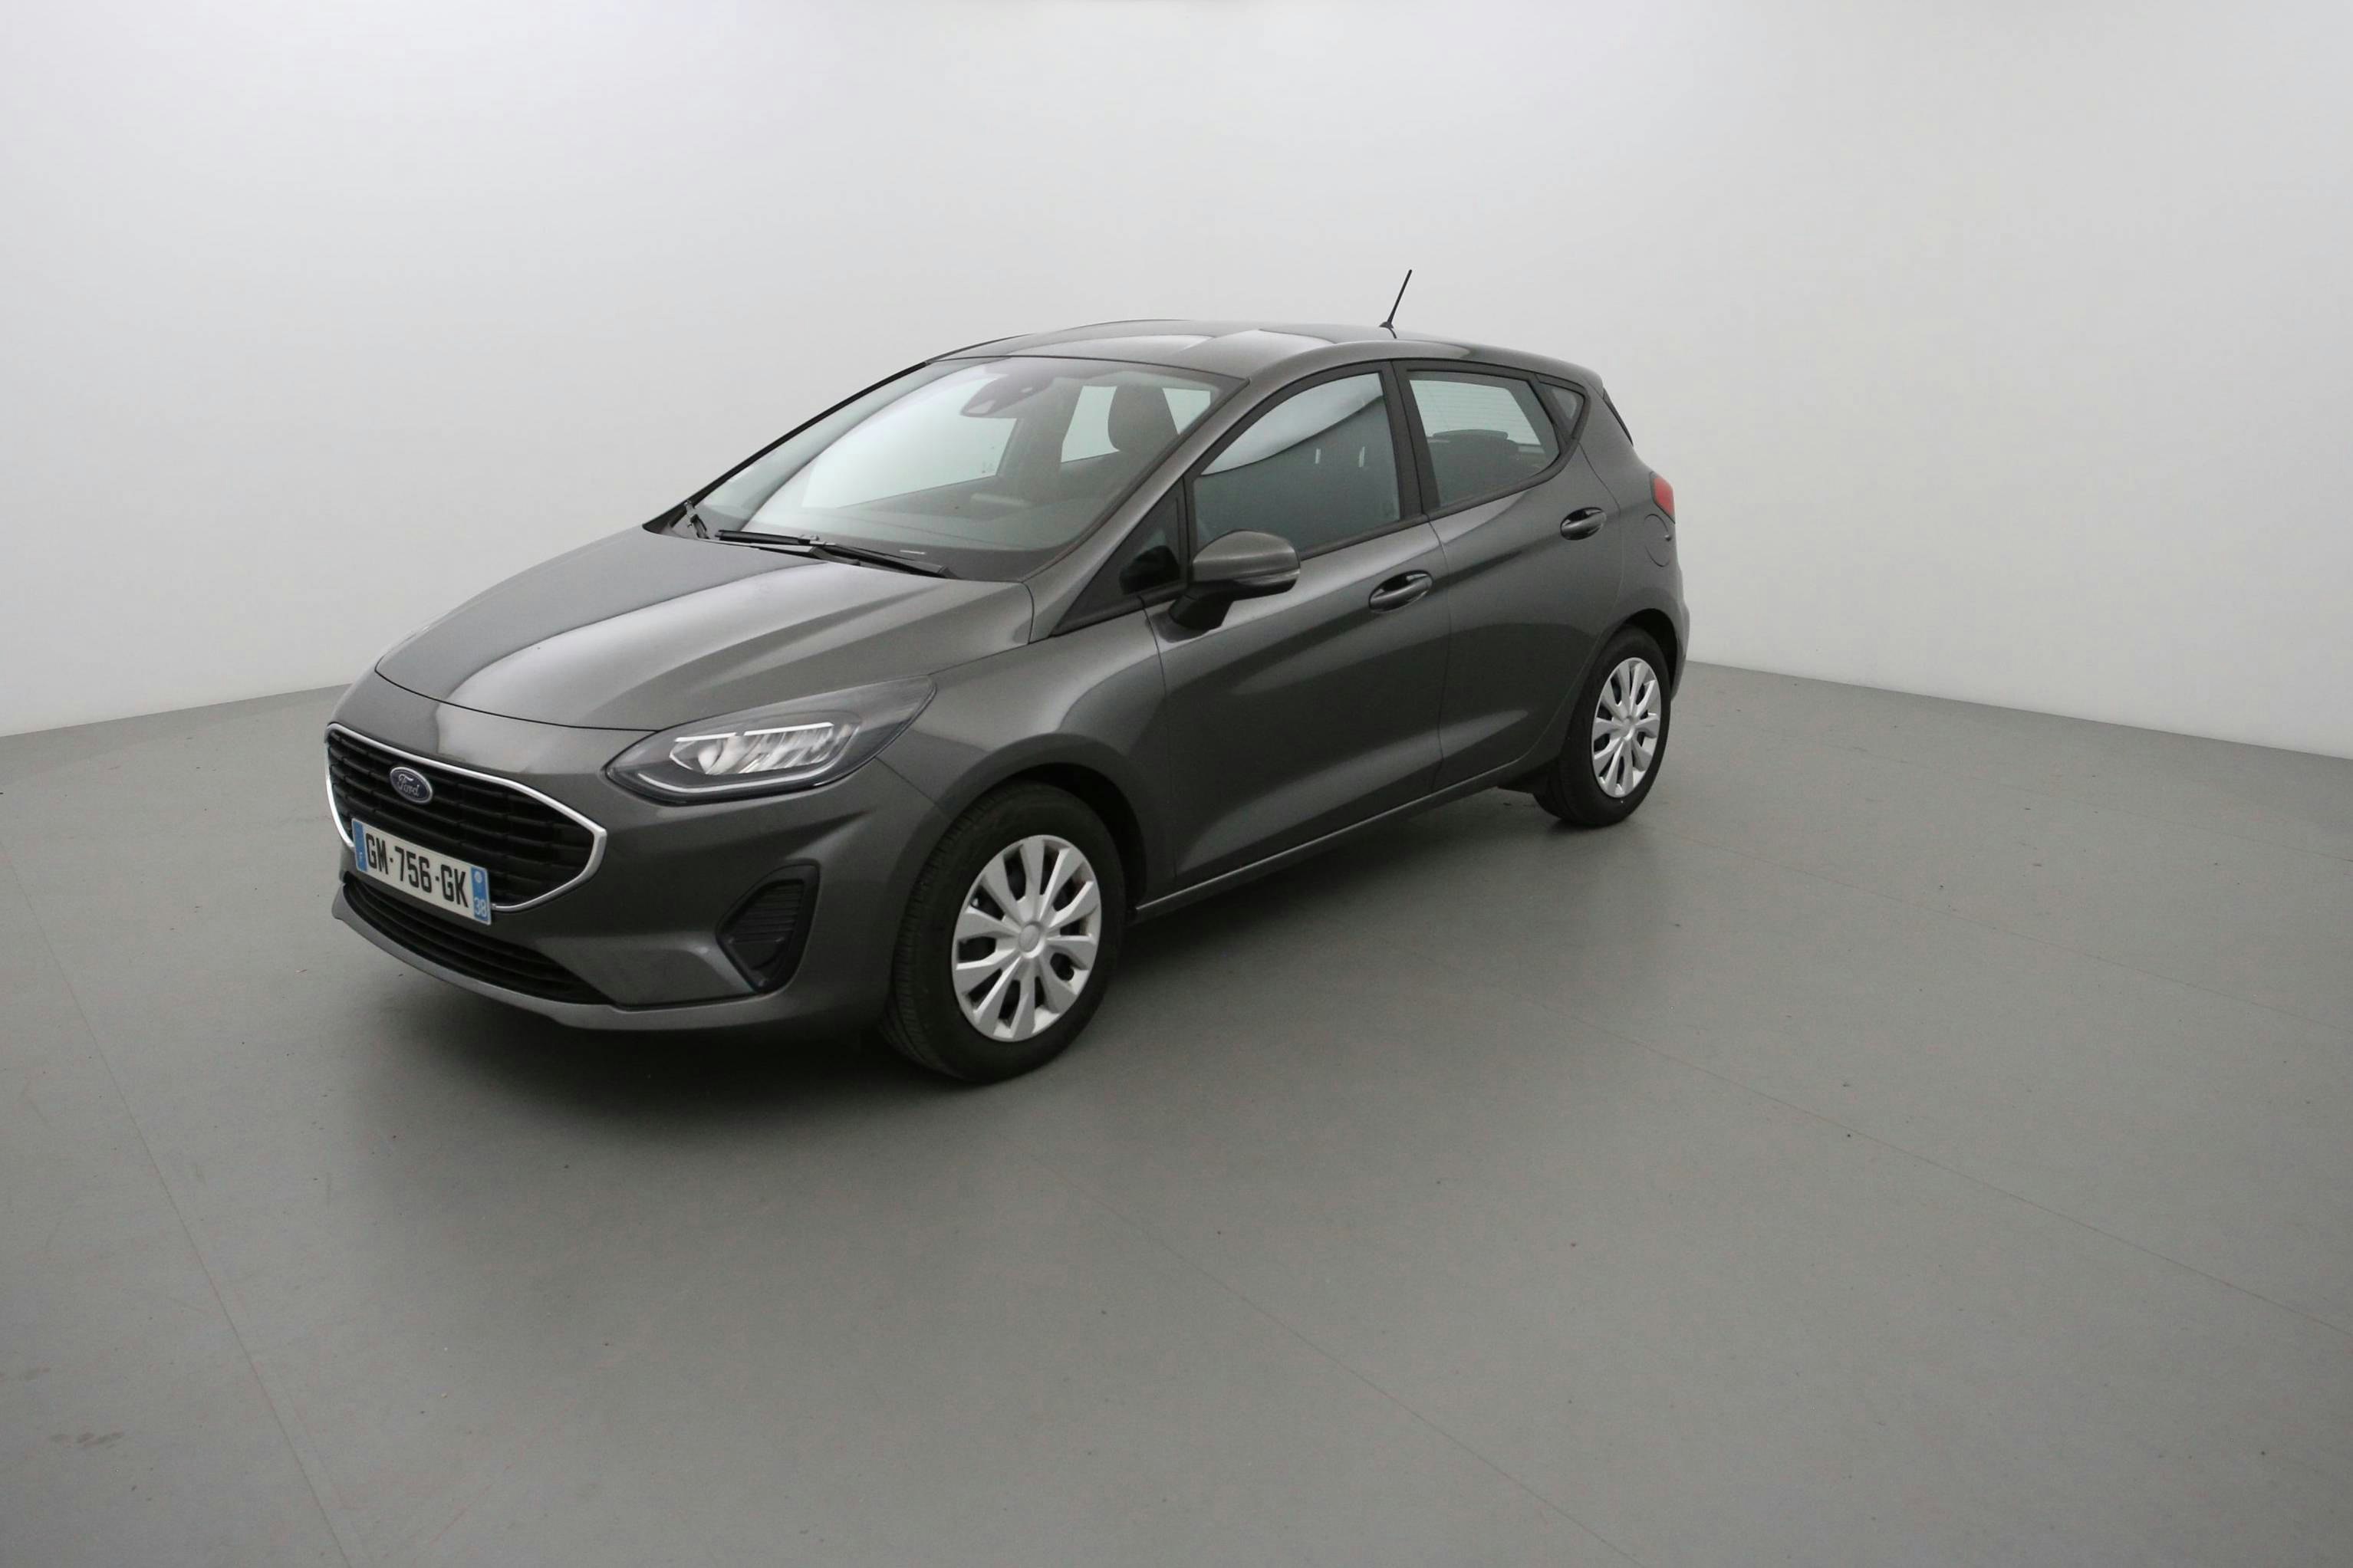 Ford Fiesta 1.0 Flexifuel 95 ch S&S BVM6 Cool & Connect occasion